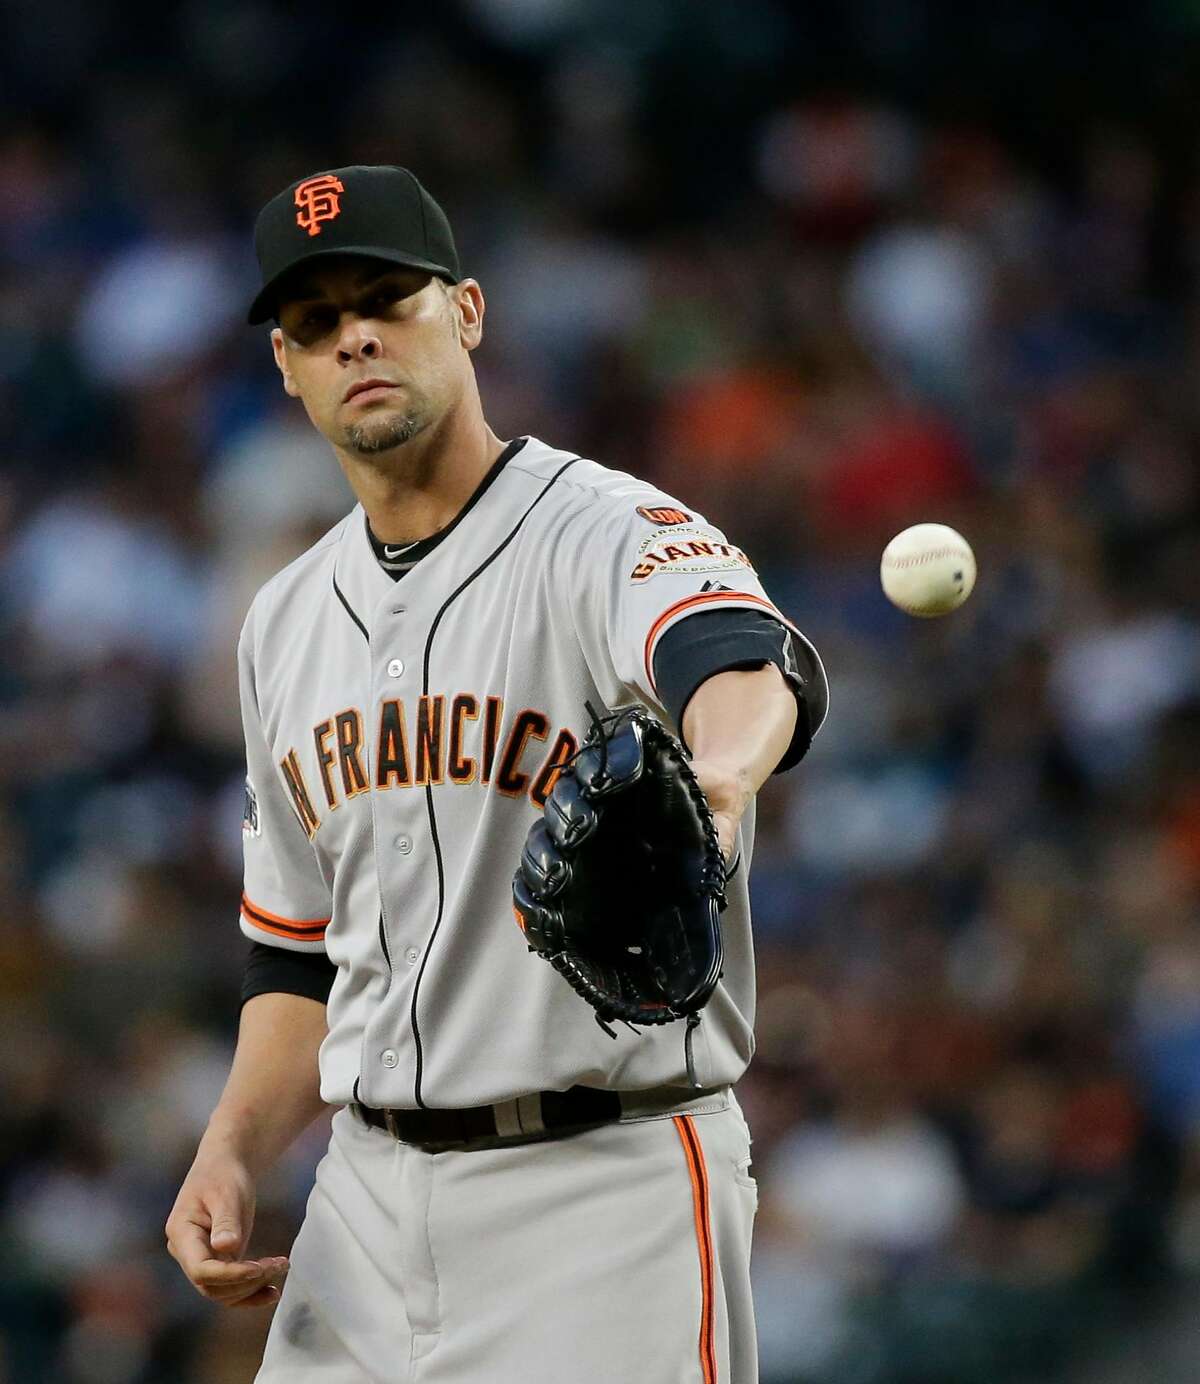 San Francisco Giants starting pitcher Ryan Vogelsong in action against the Seattle Mariners in a baseball game Thursday, June 18, 2015, in Seattle. (AP Photo/Elaine Thompson)